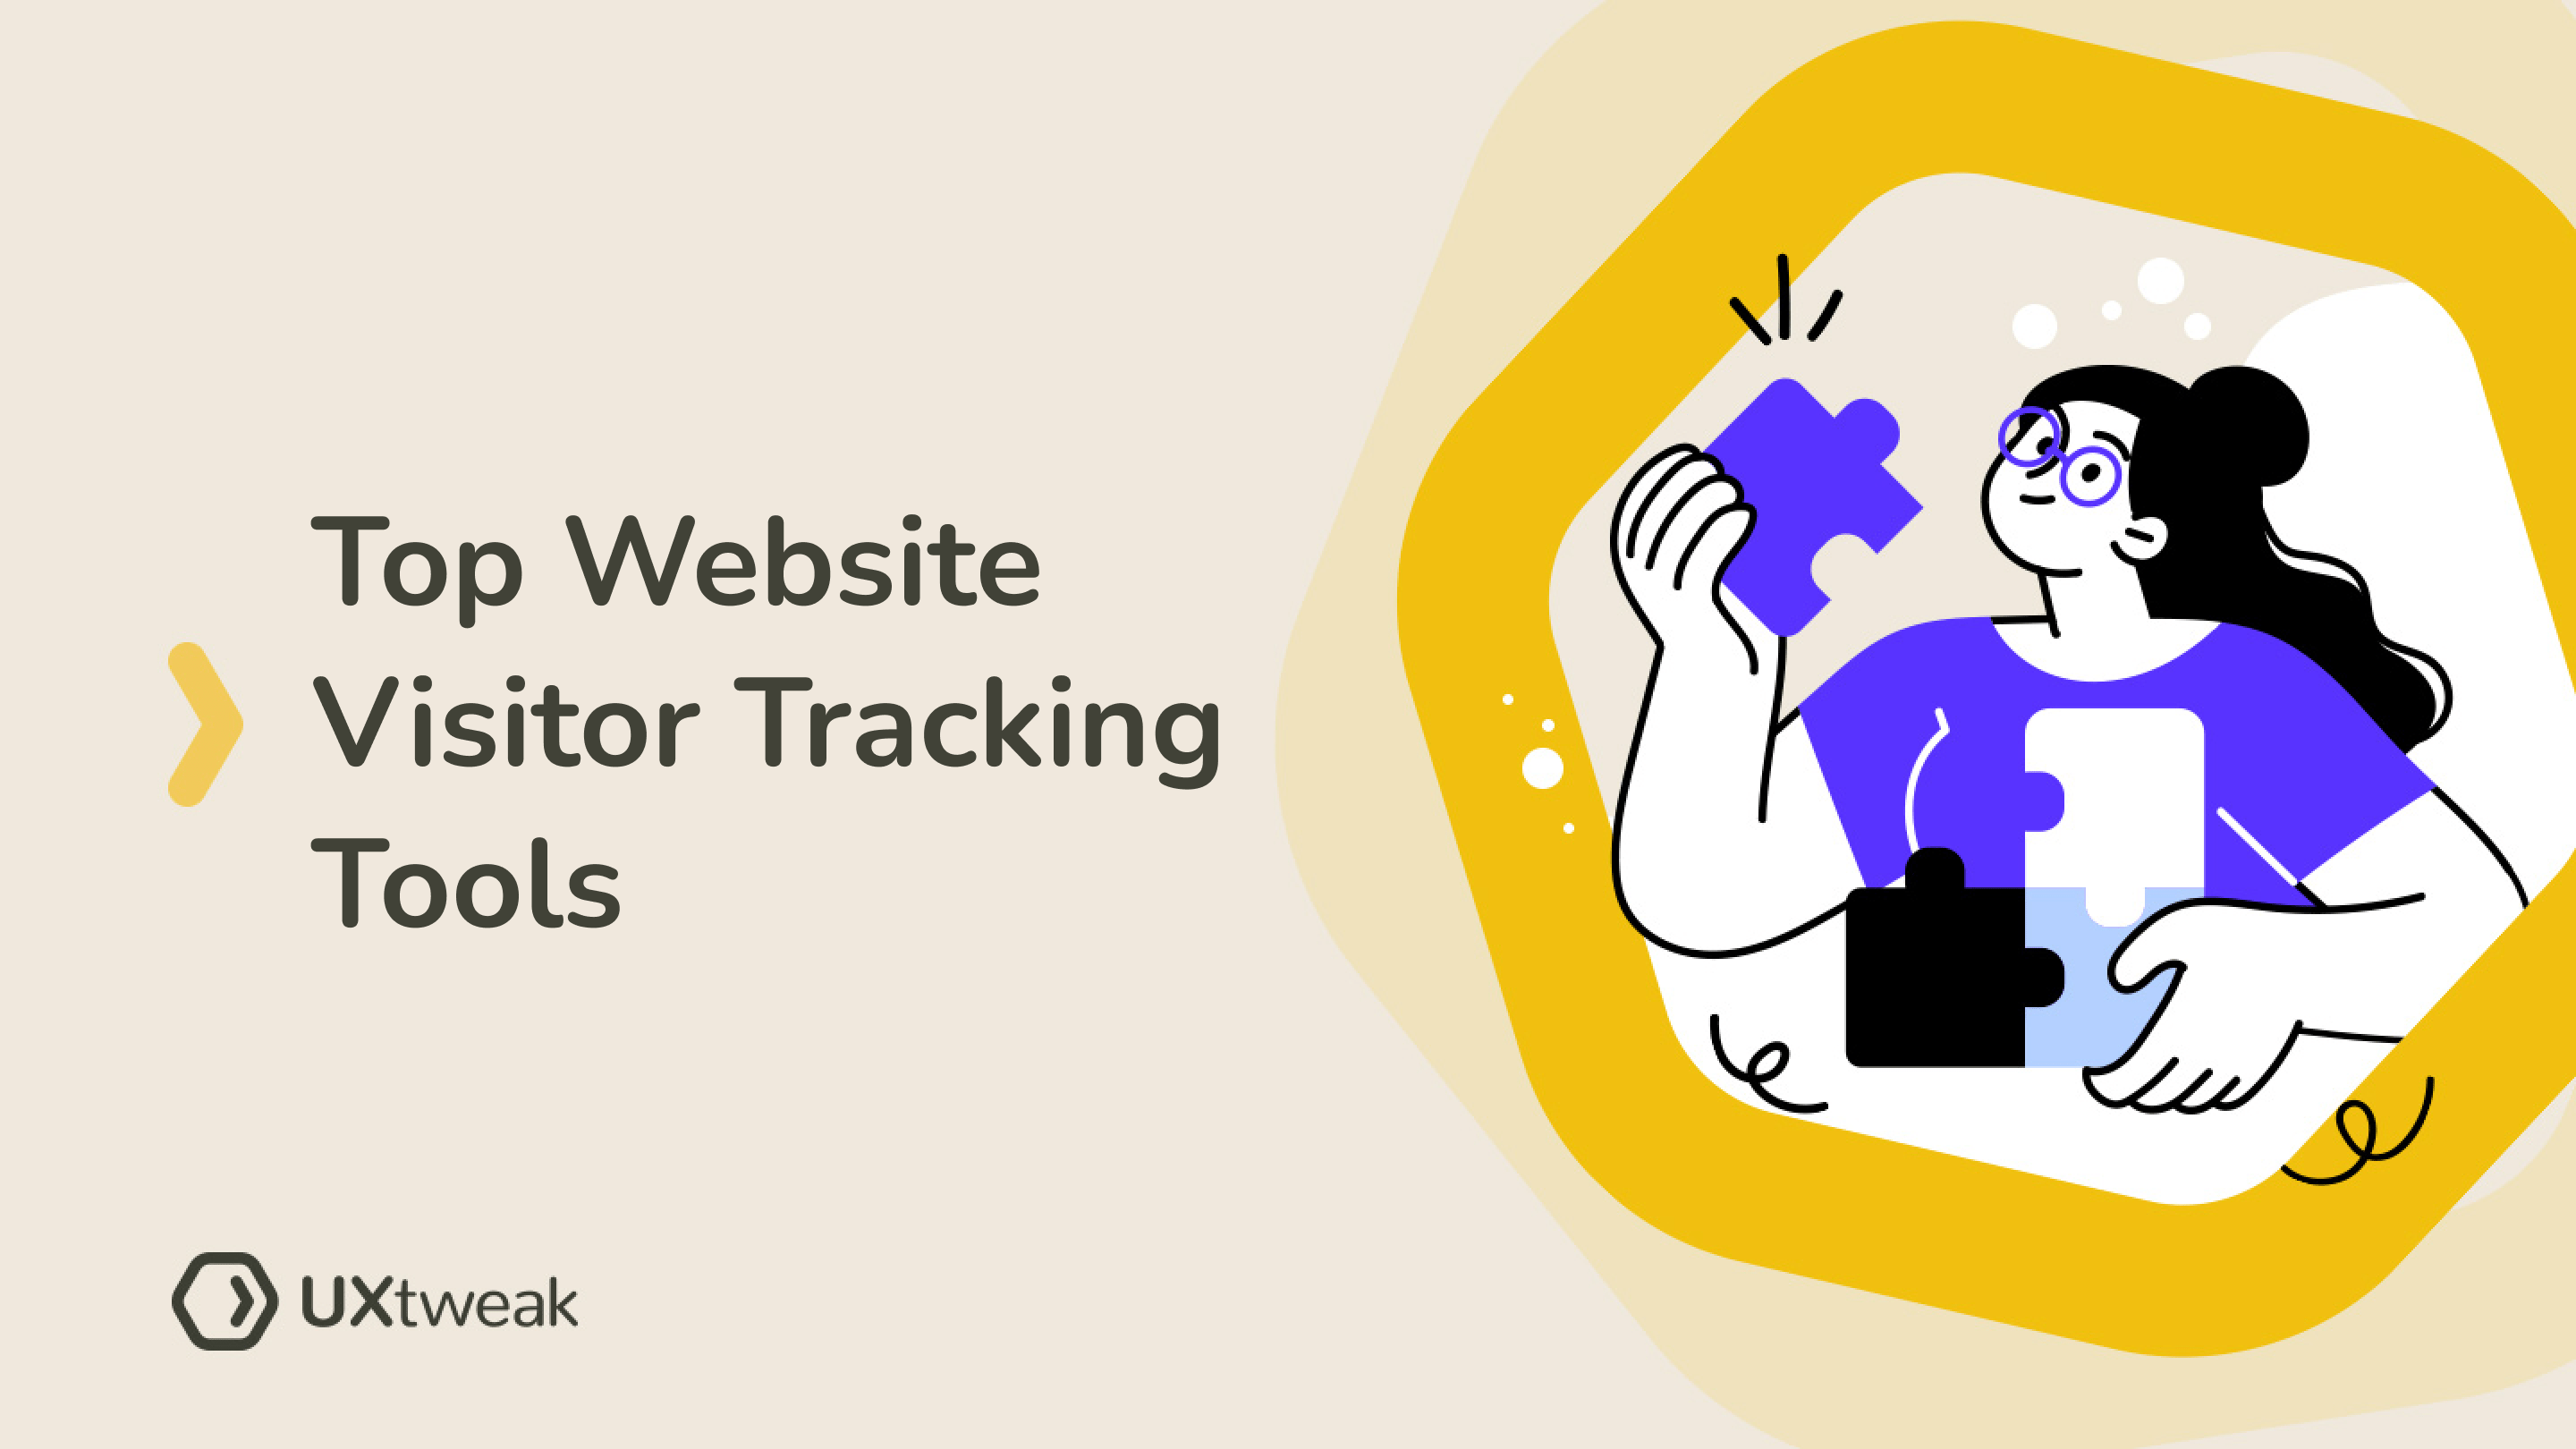 Top 21 website visitor tracking tools in 2022